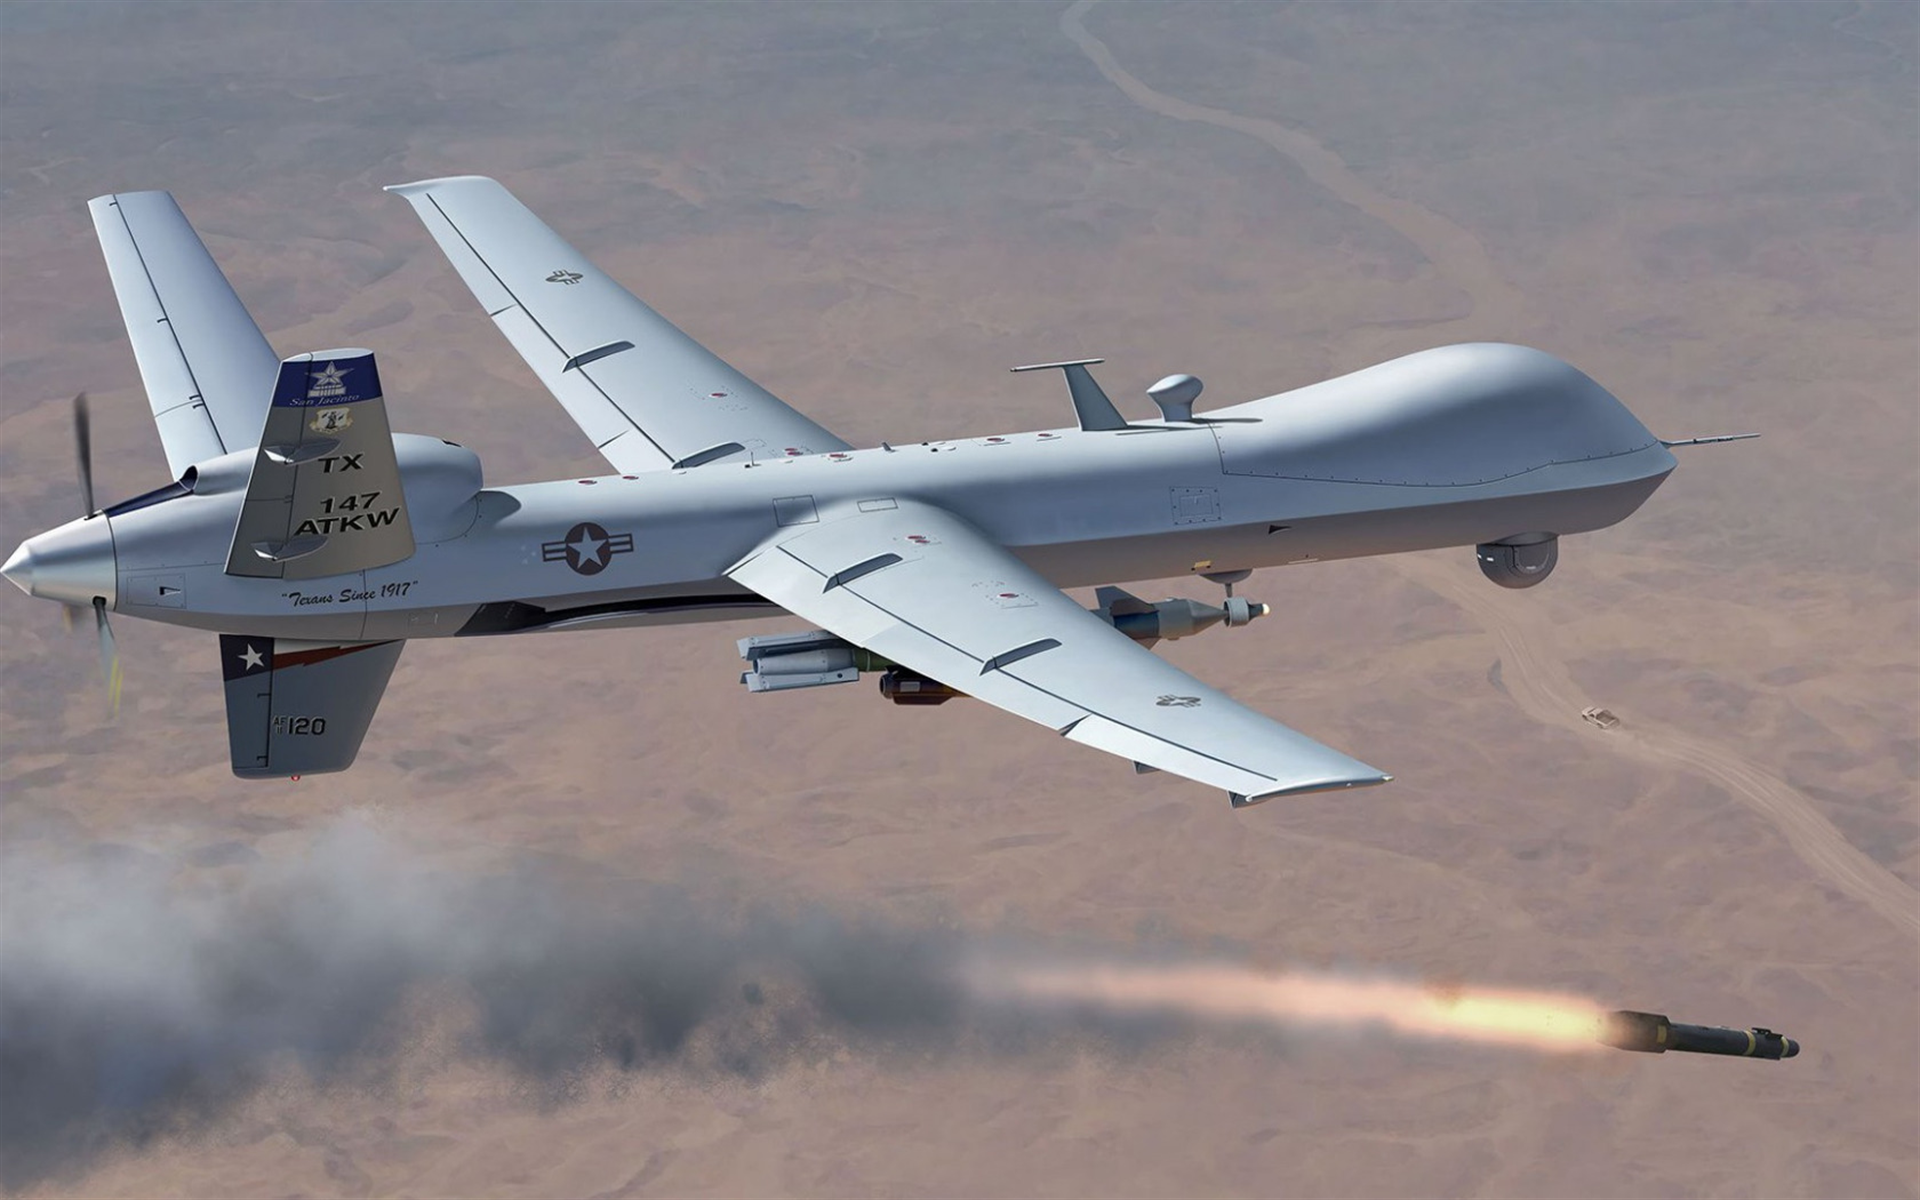 Download Wallpaper MQ 9 Reaper, Predator B, Unmanned Aerial Vehicle, UAV, General Atomics Aeronautical Systems, Unmanned Combat Aerial Vehicle, US Air Force, USA For Desktop With Resolution 1920x1200. High Quality HD Picture Wallpaper